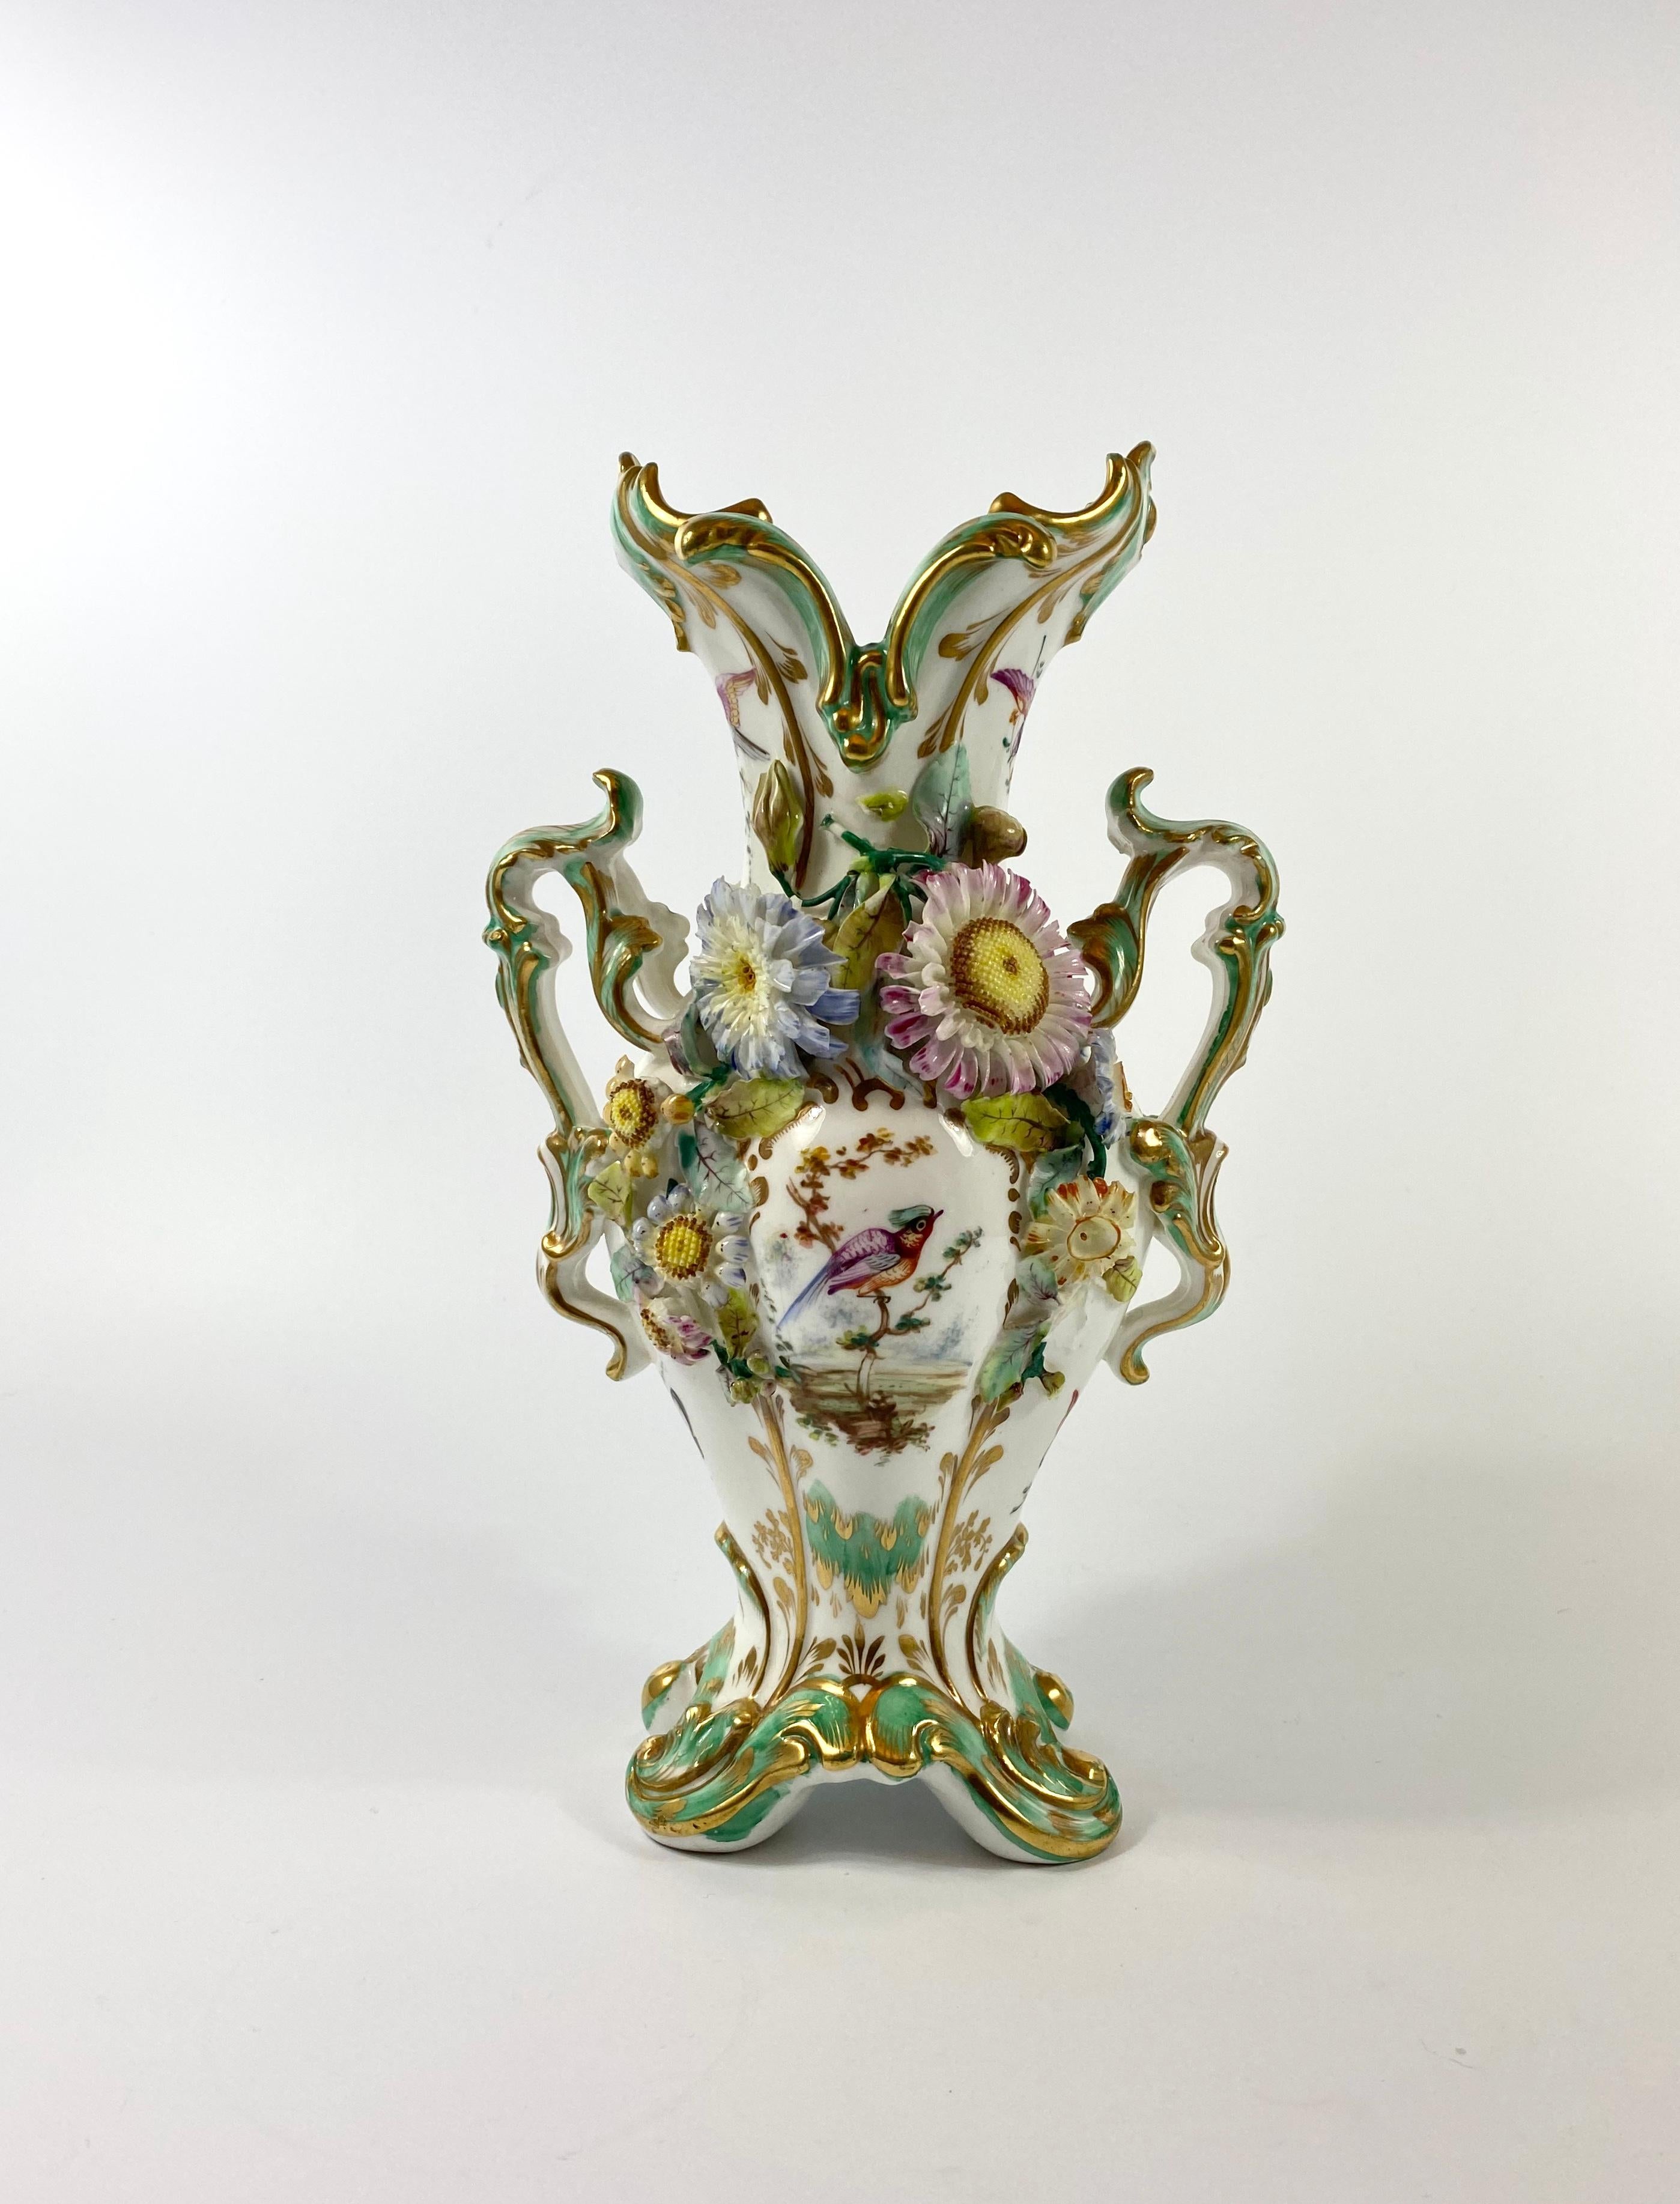 Pair of Coalbrookdale porcelain vases, circa 1830. Both vases beautifully hand painted with studies of birds, within gilt rococo scroll panels. Heavily encrusted with brightly enamelled flowers, having twin scroll handles and set upon four scroll